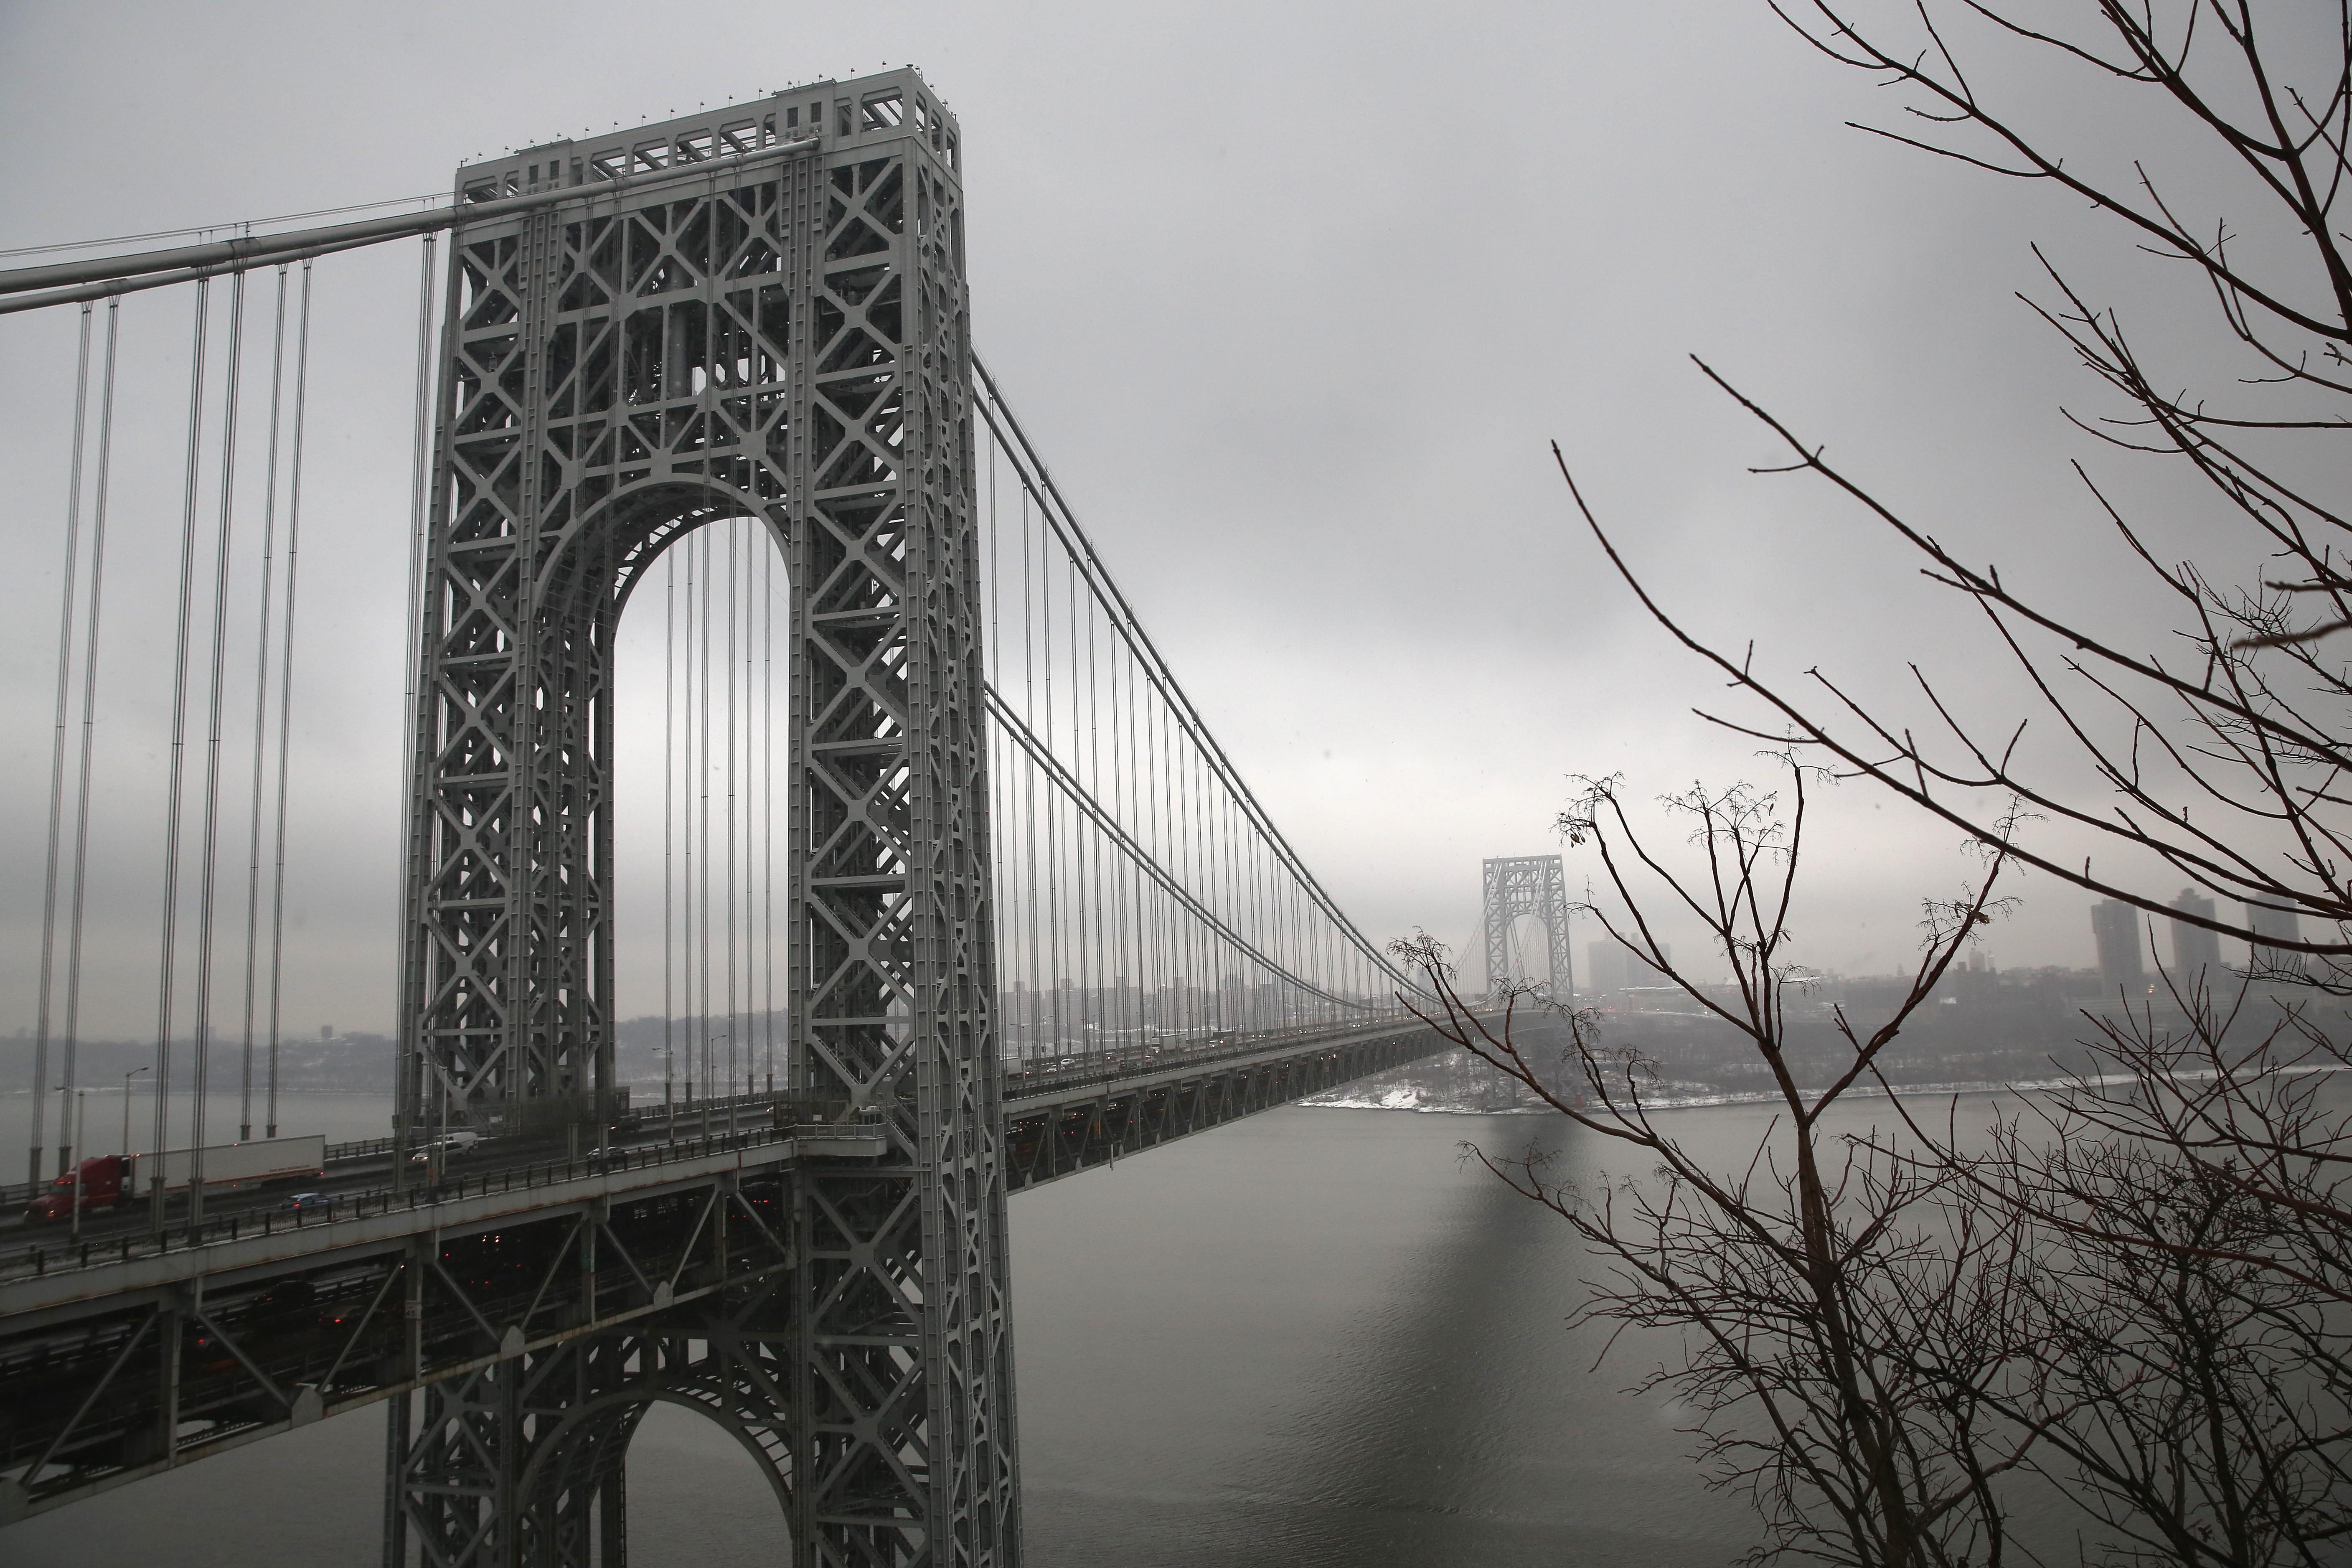 7. Bridgegate. Samson’s guilty plea was the opening act for one of the most-covered political stories of 2016 in New Jersey: the Bridgegate trial. In that case, two Christie appointees (former Port Authority Deputy Executive Director Bill Baroni and former Christie Deputy Chief of Staff Bridget Kelly) were found guilty on nine counts of conspiracy and related charges for misusing Port Authority property as a way to enact political retribution against Fort Lee Mayor Mark Sokolich for not endorsing Christie for re-election in 2013. While the closures happened three years ago in 2013, the trial renewed public interest and attention on the case. Now, the case is in limbo as defendants pursue a re-trail or acquittal.